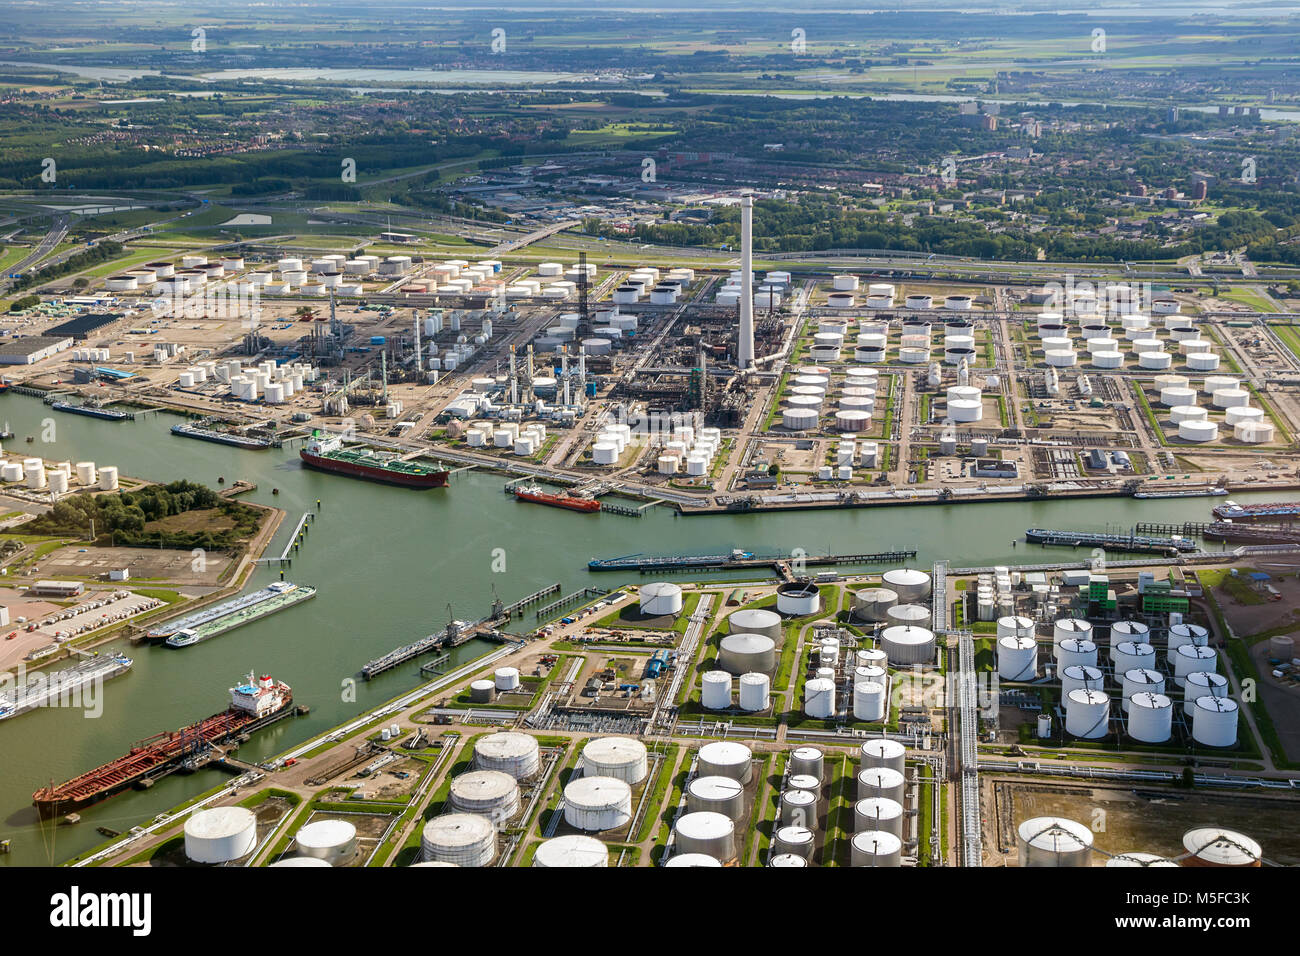 Aerial view of oil tankers moored at a oil storage terminal and oil refinery in a port. Stock Photo